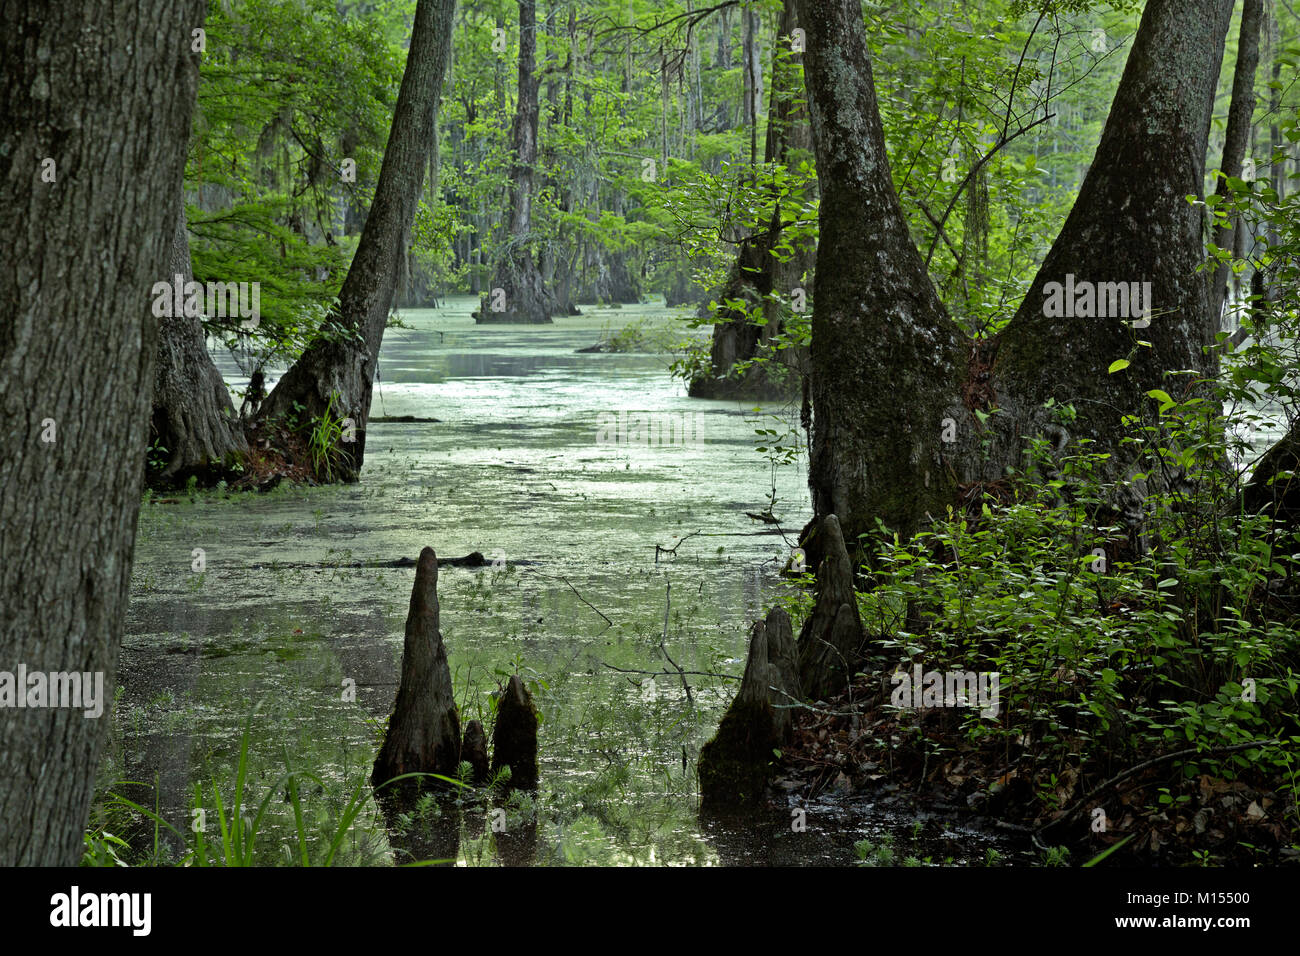 NC01483-00...NORTH CAROLINA - Bald cypress and tupalo gum trees surrounded by a floating mat of duckweed in Merchant Millpond; at Merchant Millpond St Stock Photo